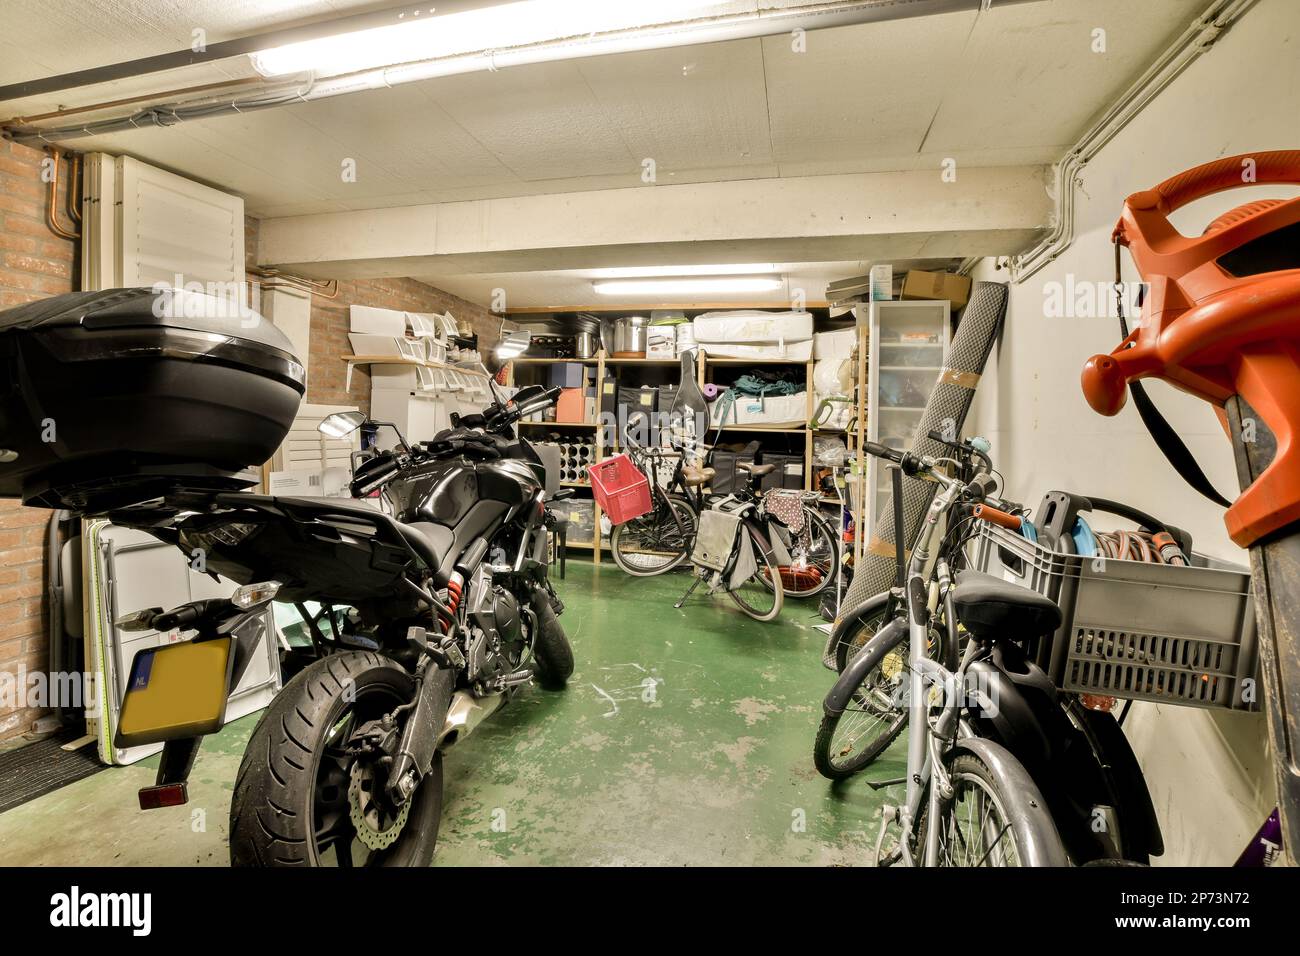 some motorcycles parked in a garage with no one on the bike, and another behind it that has been removed Stock Photo